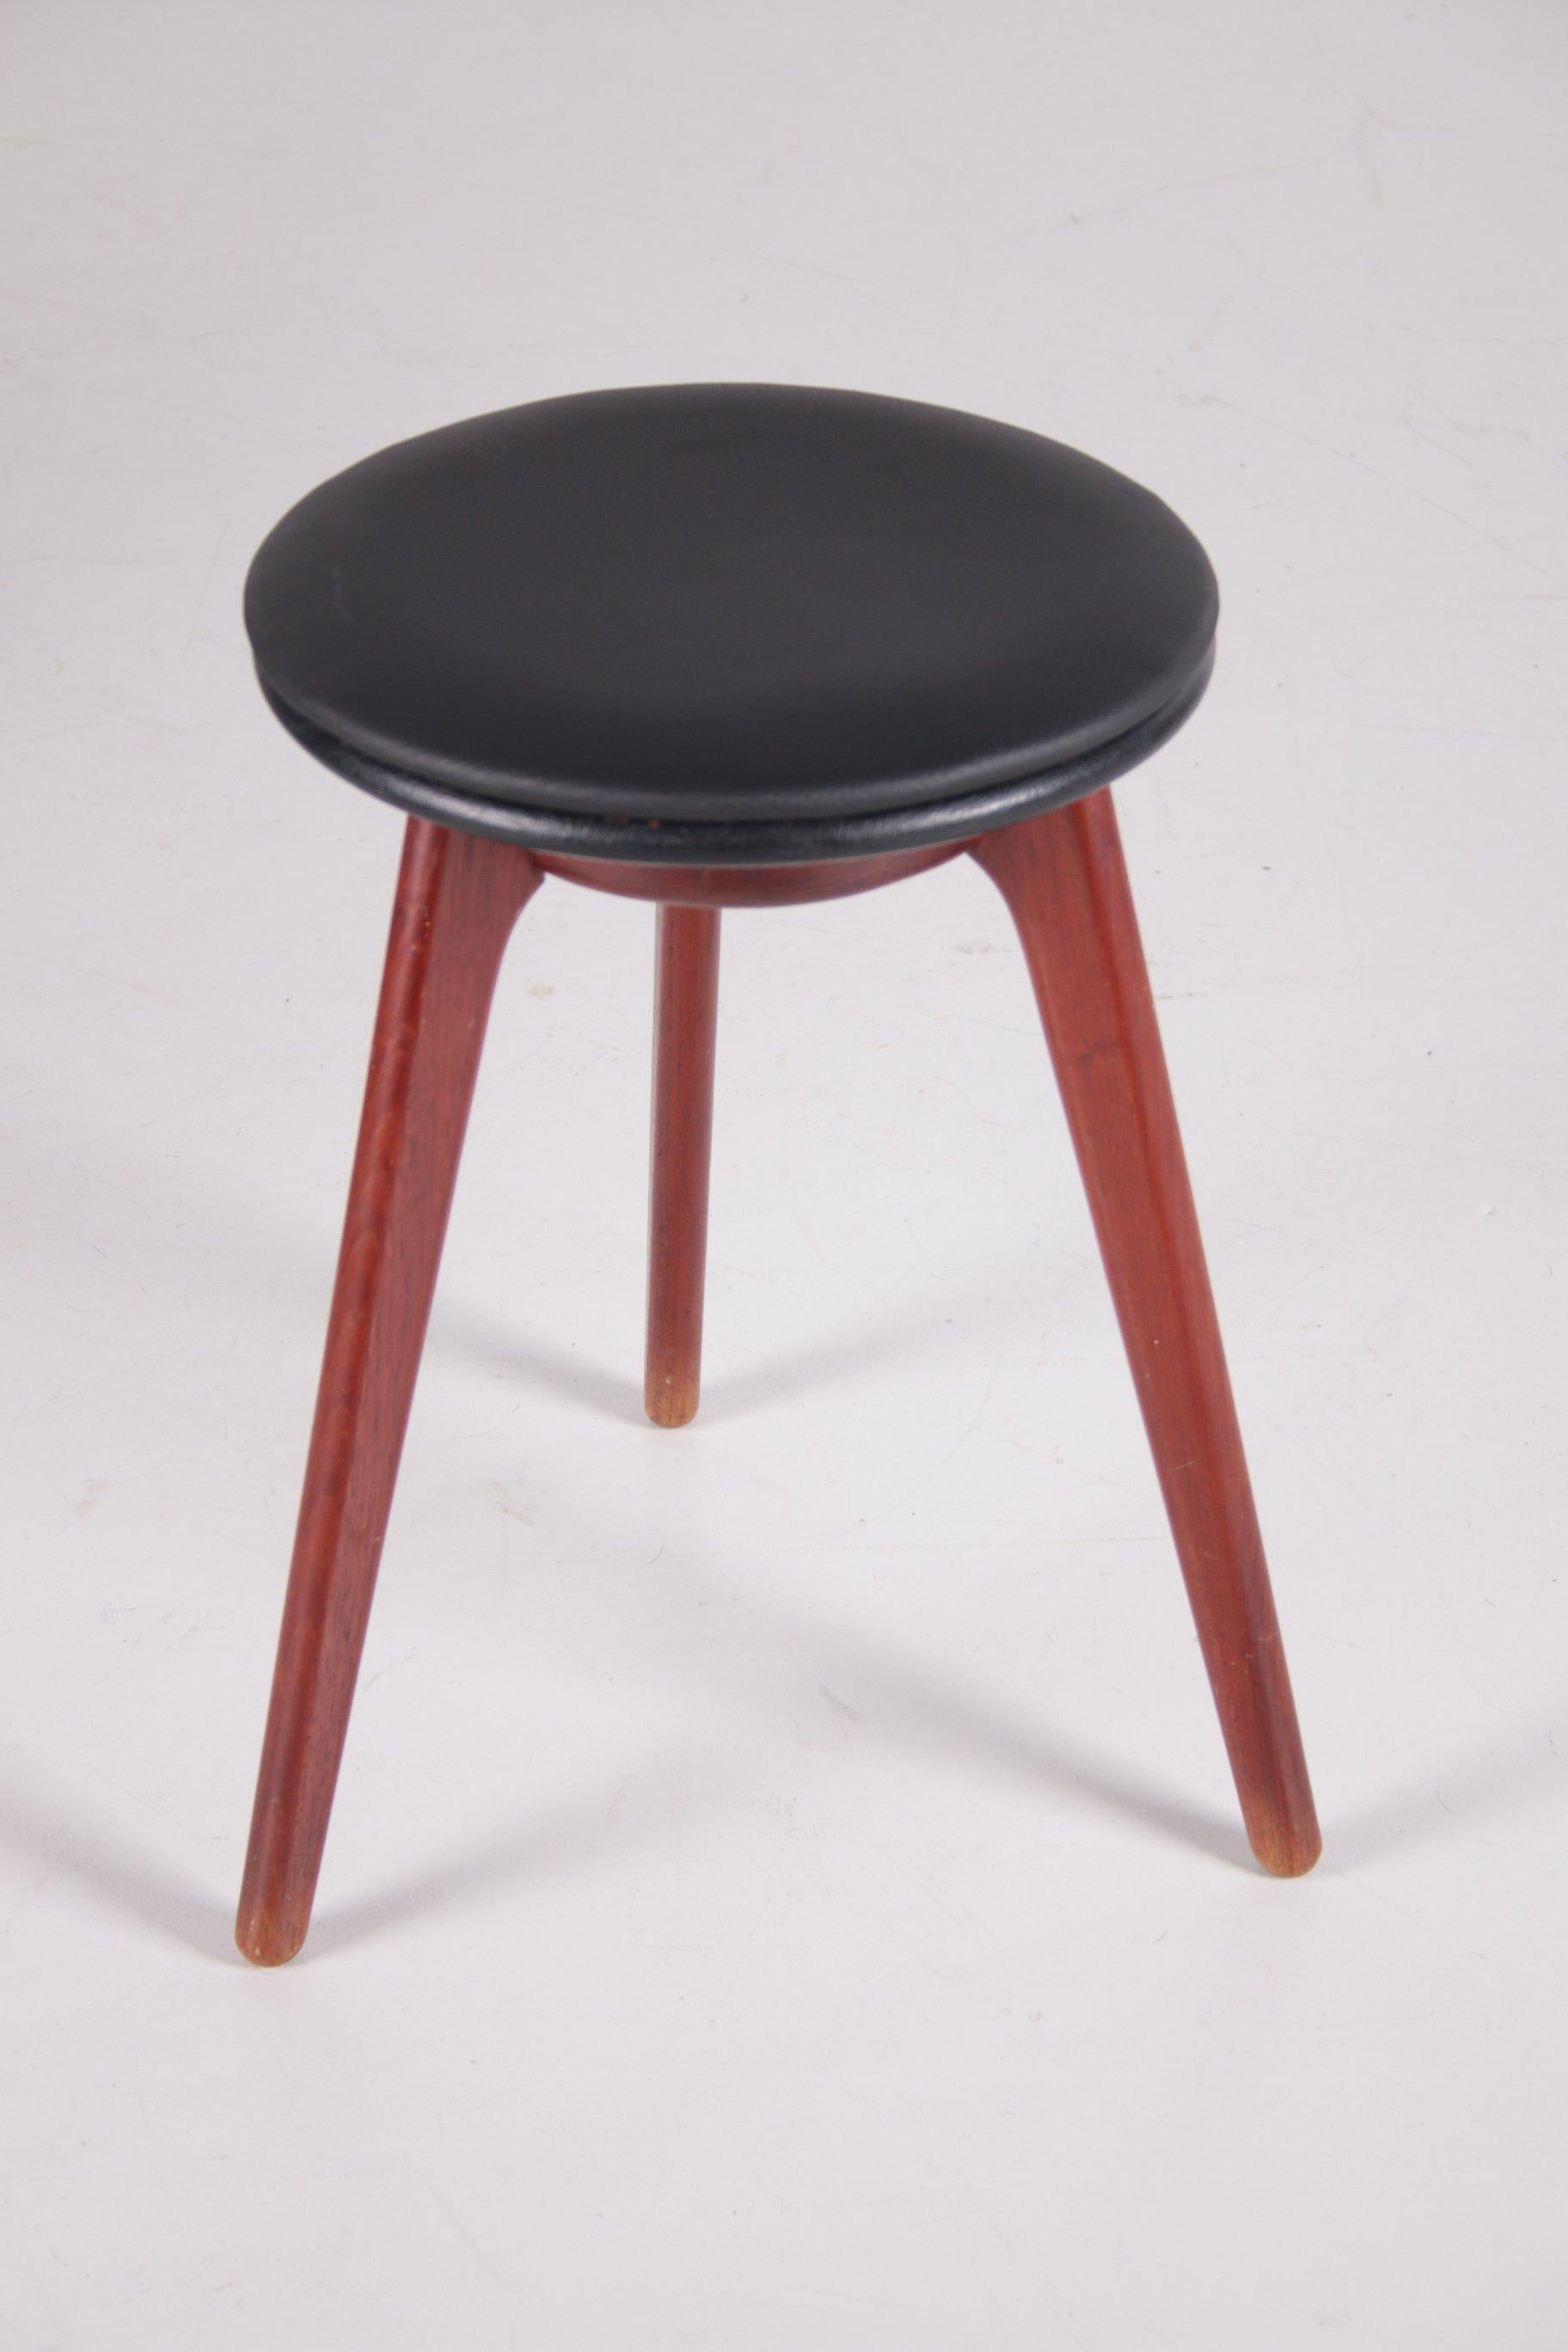 Leather Danish Design Side Stool by Erik Buch Made by Domus Danica, 1960s For Sale